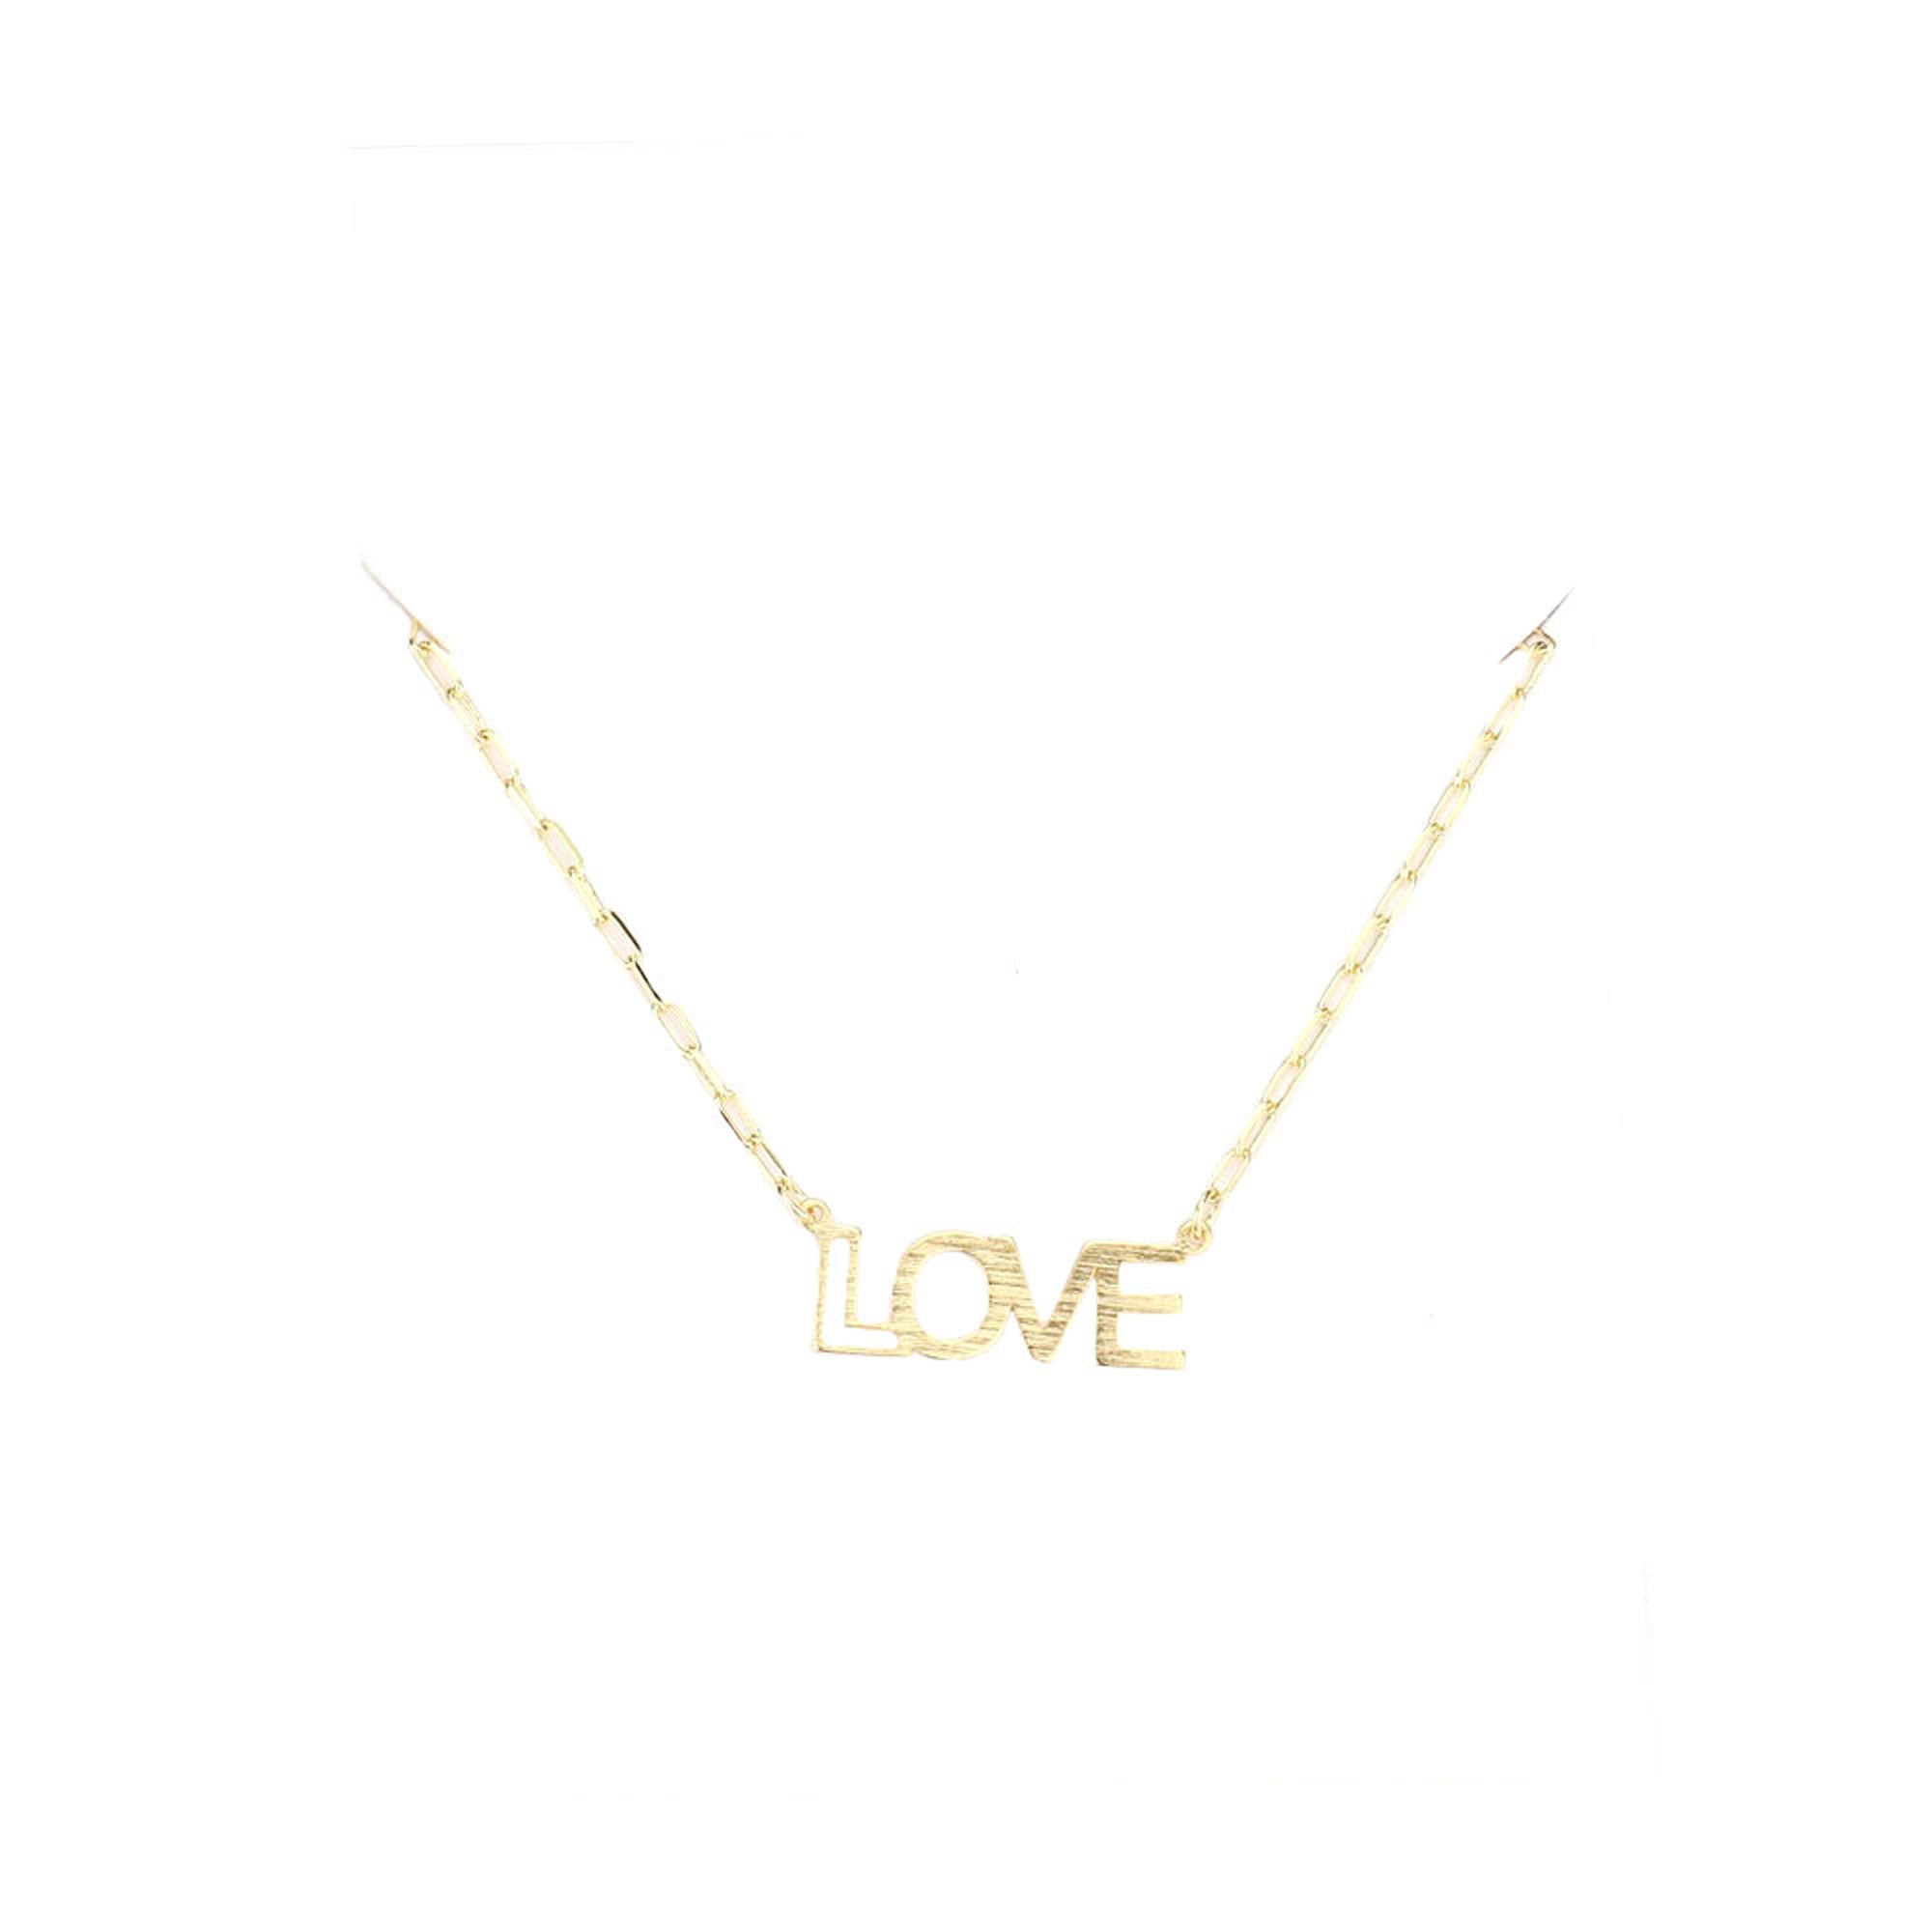 Gold LOVE Brass Metal Message Pendant Necklace, Get ready with these Message Pendant Necklace, put on a pop of color to complete your ensemble. Perfect for adding just the right amount of shimmer & shine and a touch of class to special events. Perfect Birthday Gift, Anniversary Gift, Mother's Day Gift, Graduation Gift.